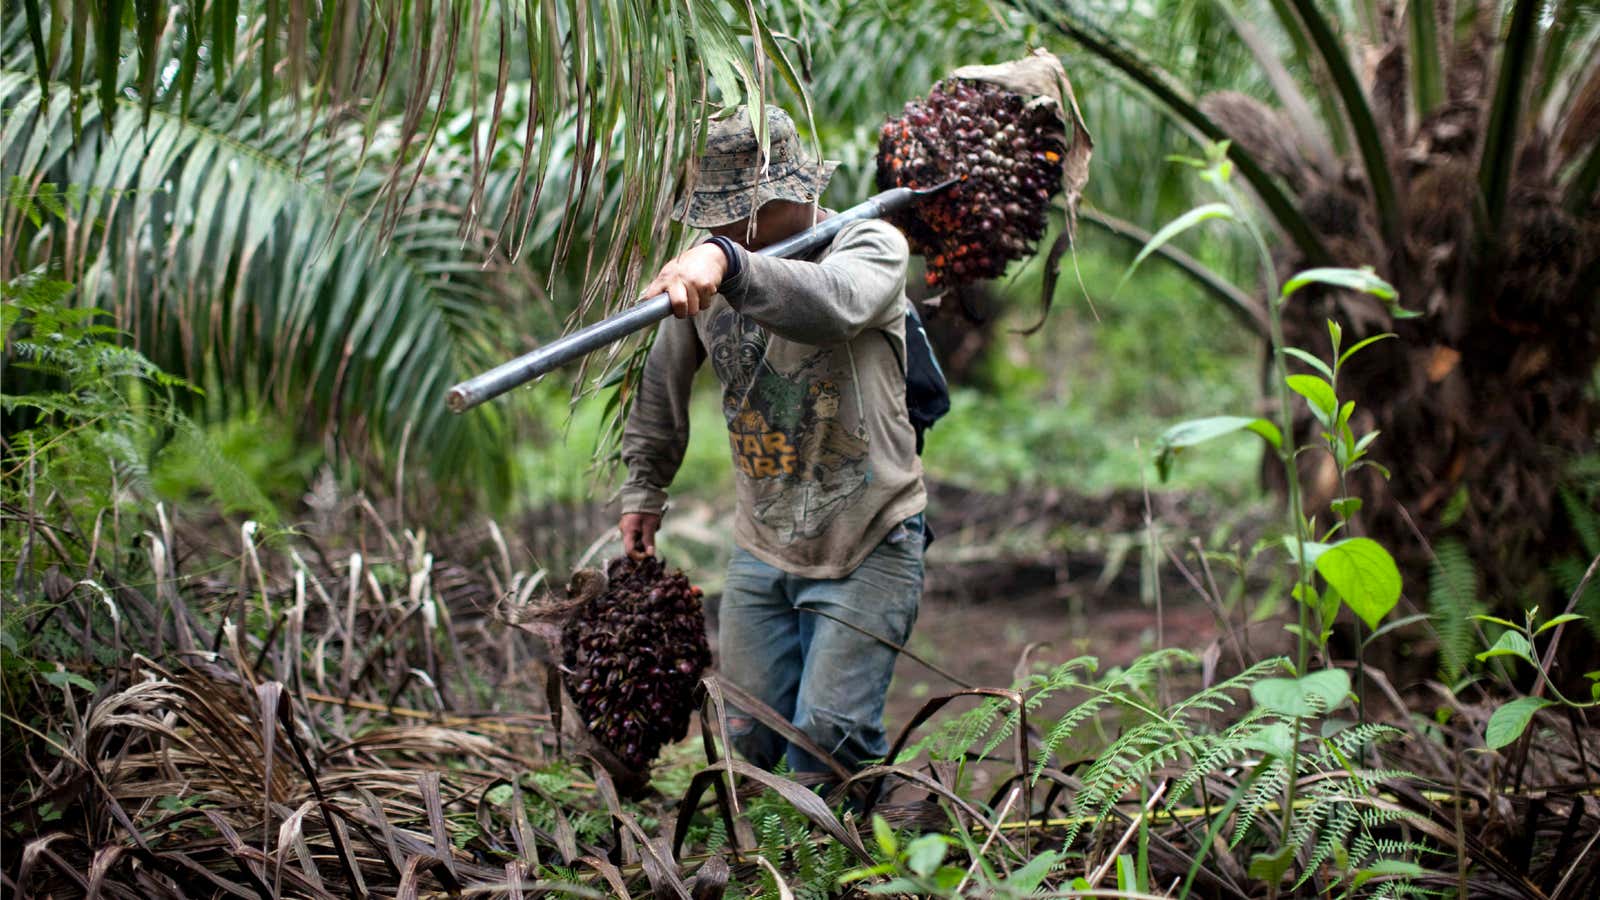 Guatemalan palm oil workers bear a heavy load to feed the world’s growing appetite.